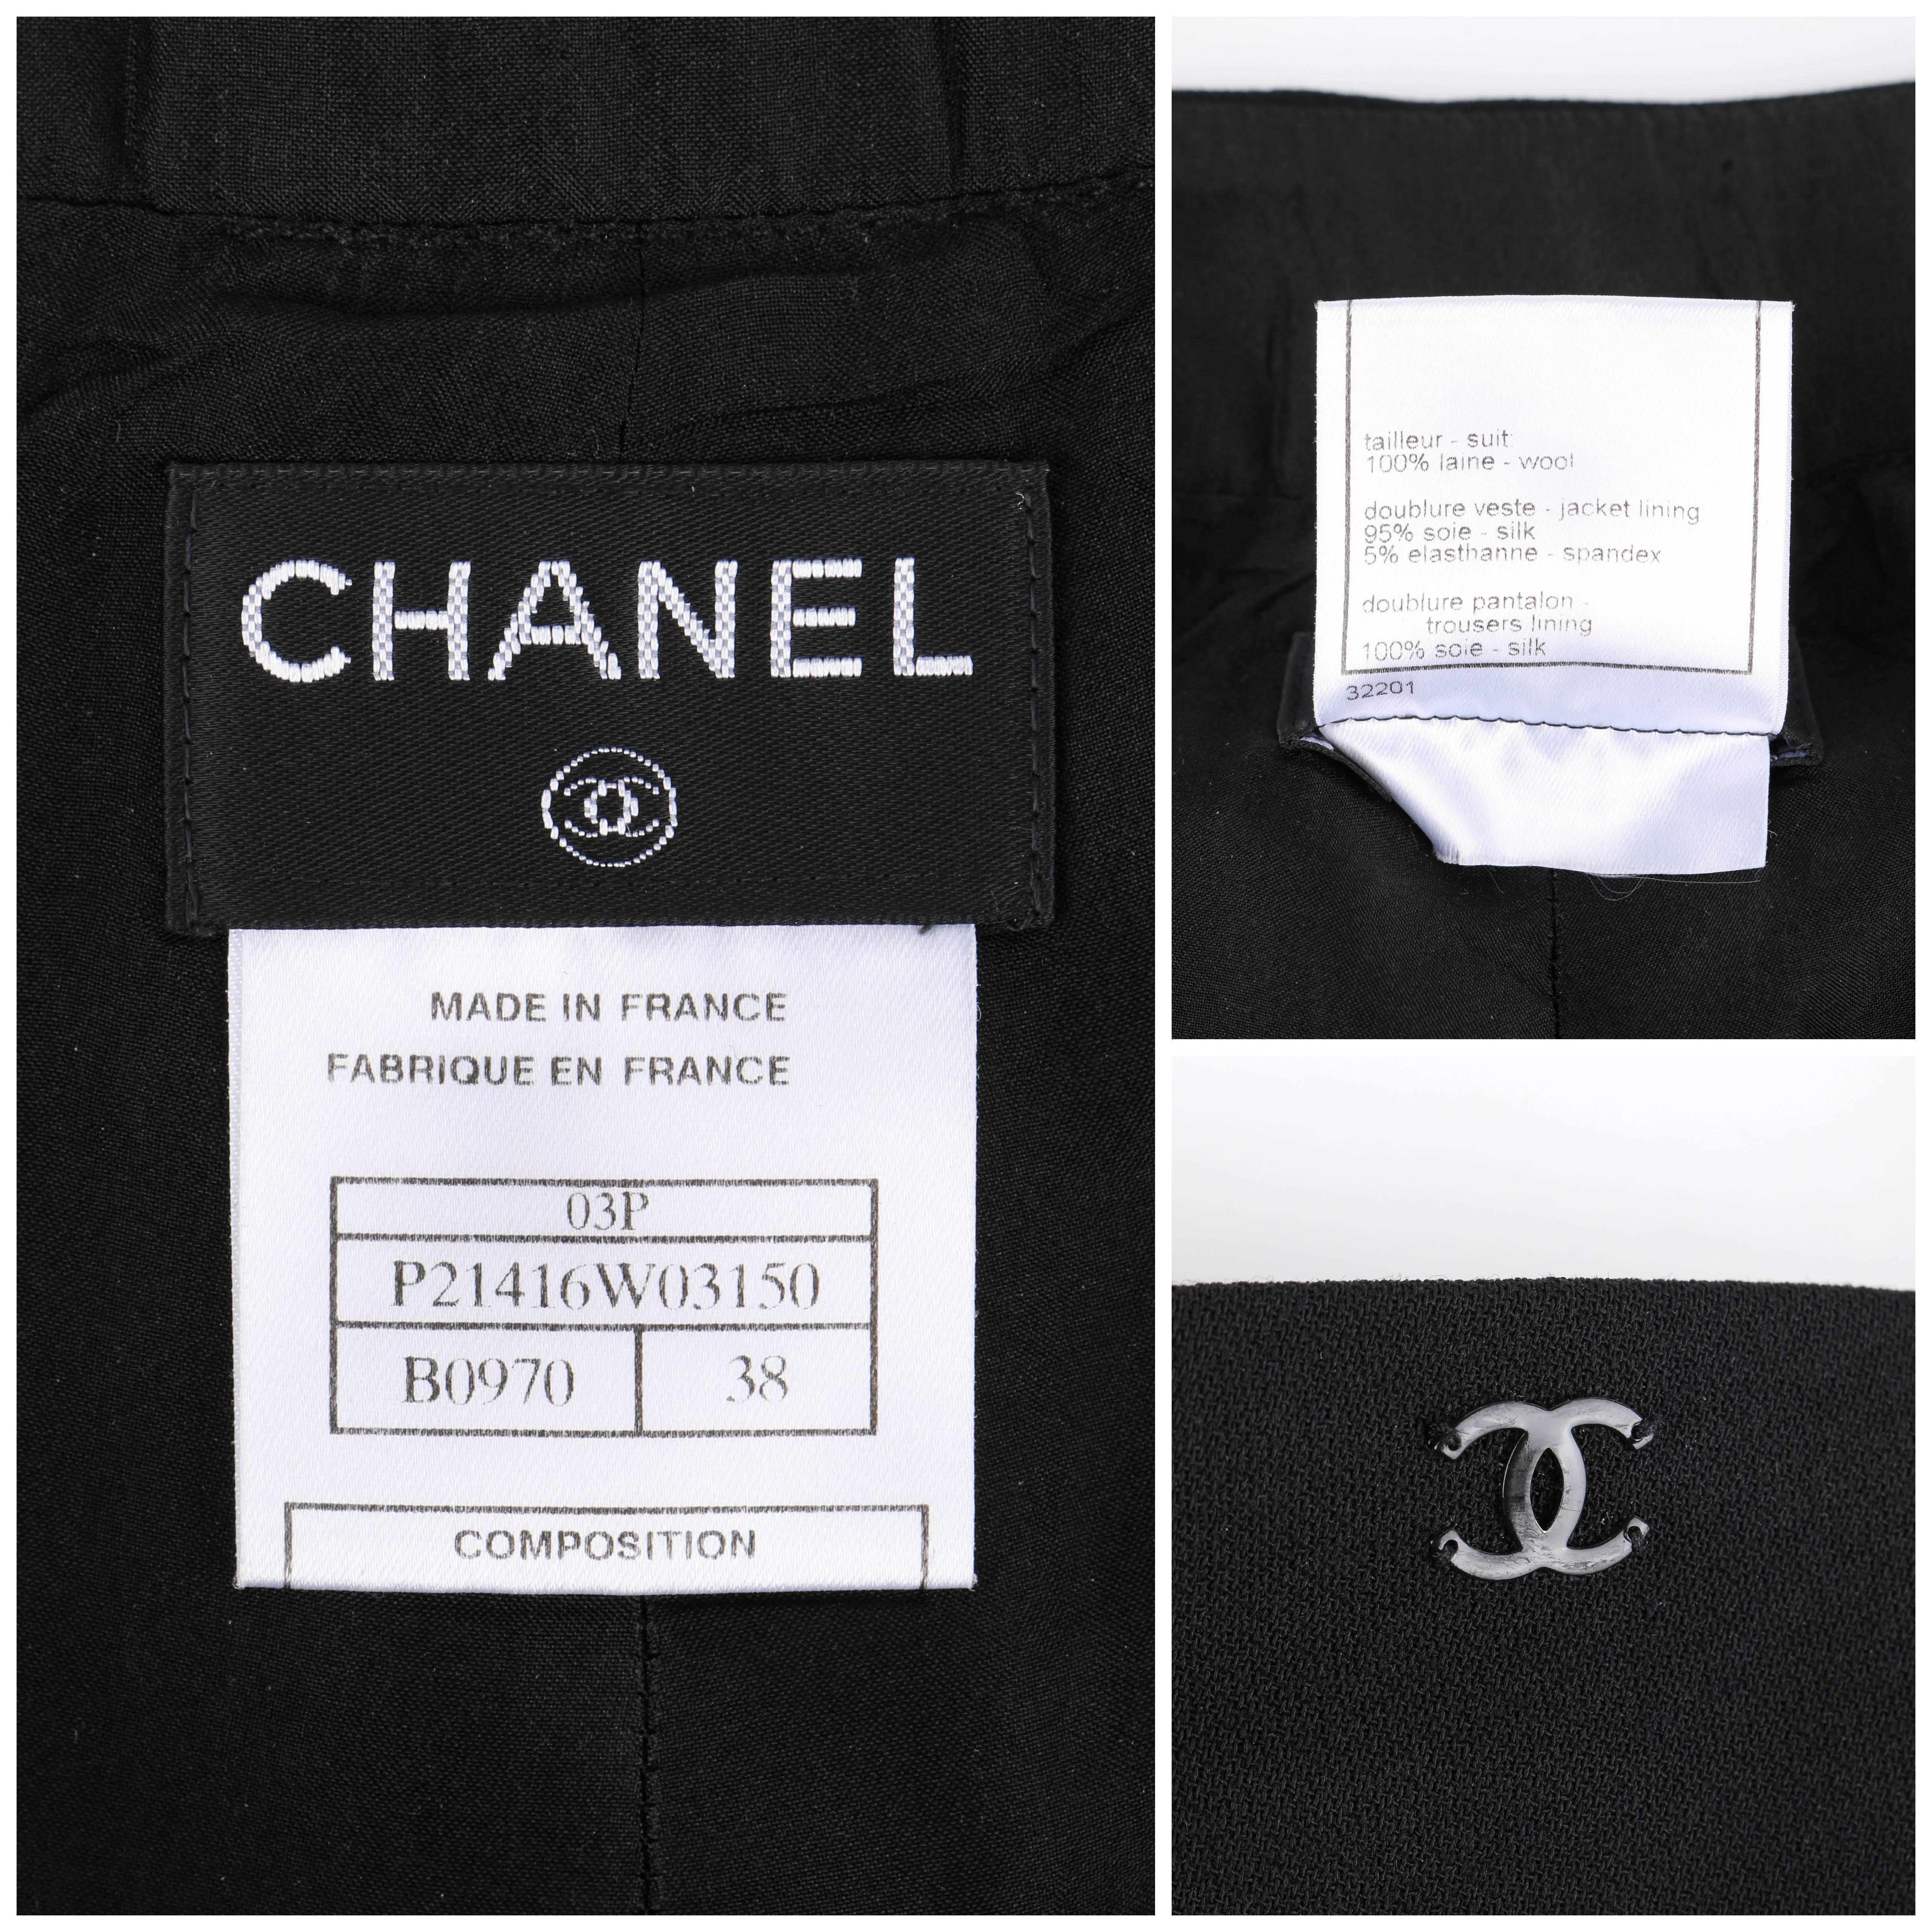 CHANEL S/S 2003 Classic Black Wool Slim Cut Cropped Pants Trousers 3